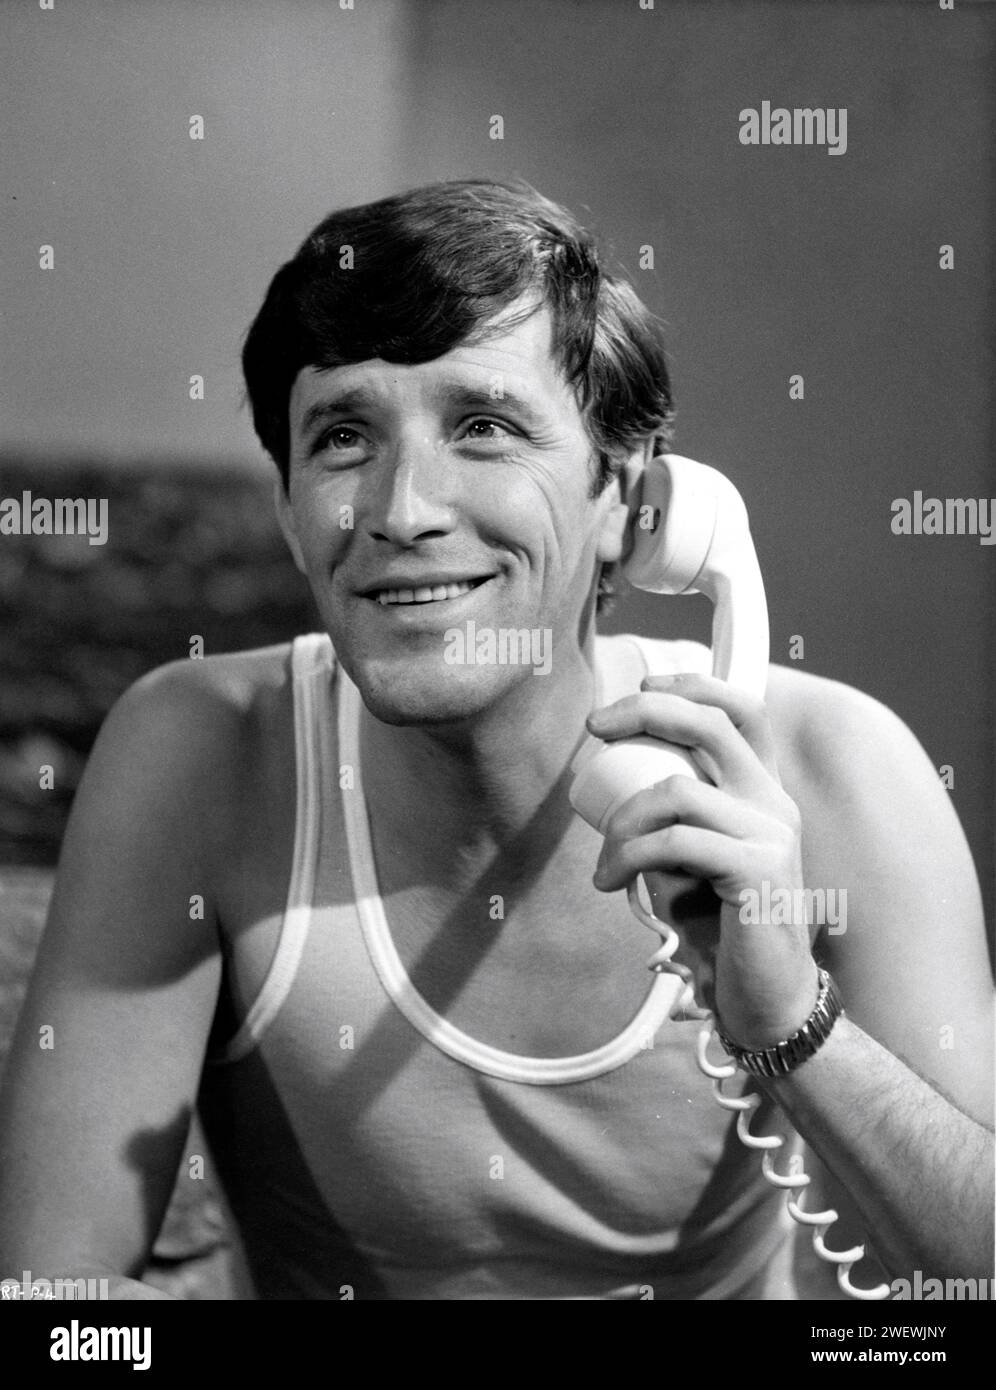 TOM BELL in HE WHO RIDES A TIGER 1965 director CHARLES CRICHTON writer Trevor Peacock David Newman Productions / British Lion Film Corporation Stock Photo